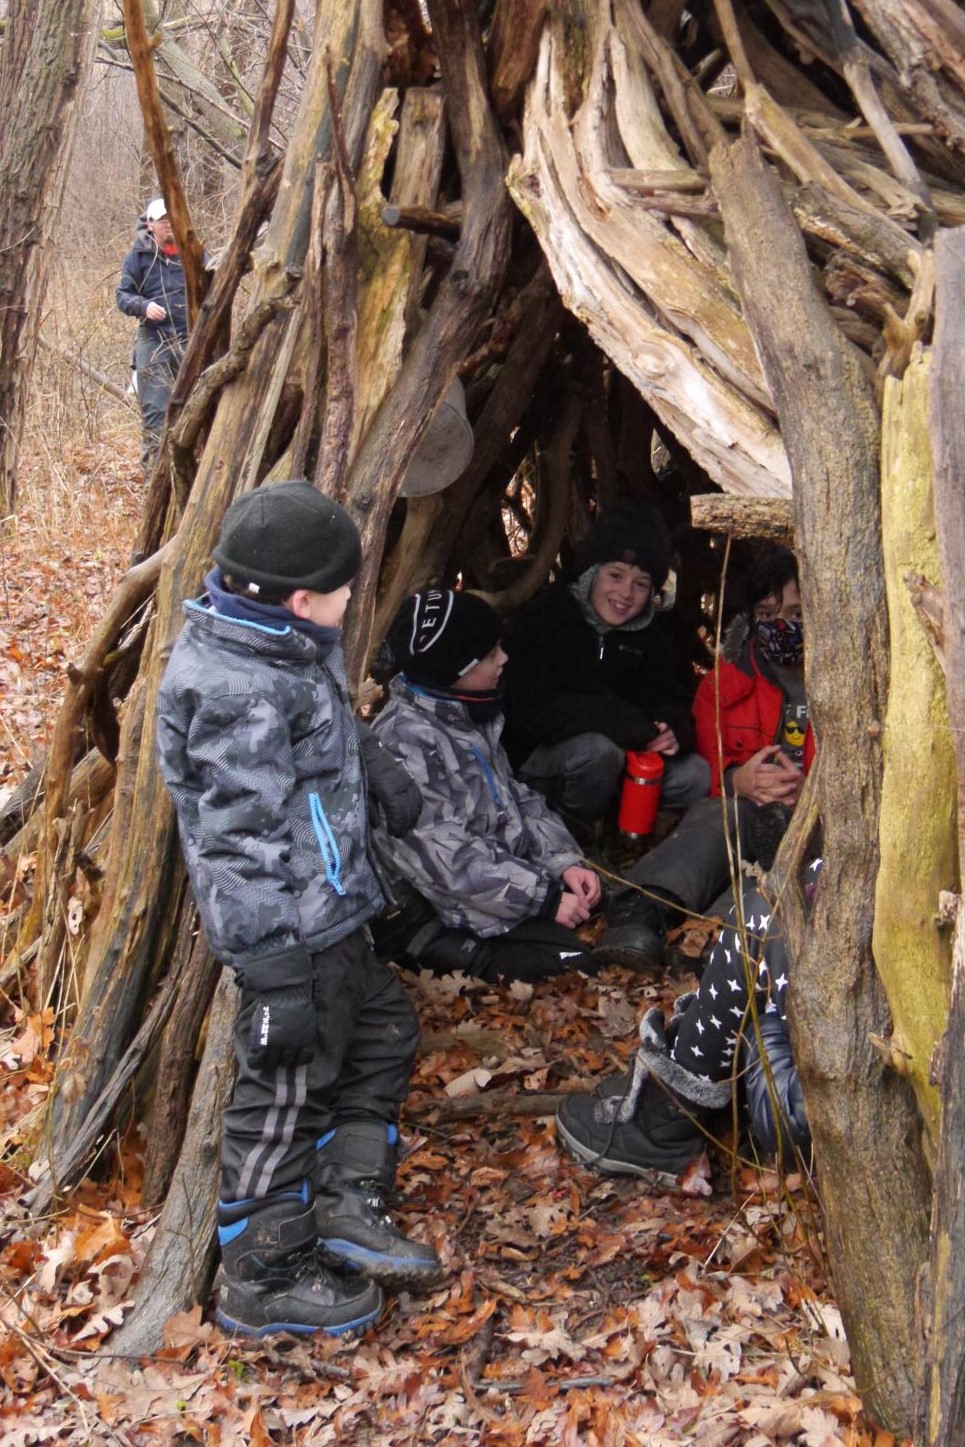 A group of children sit inside a fort made of sticks.